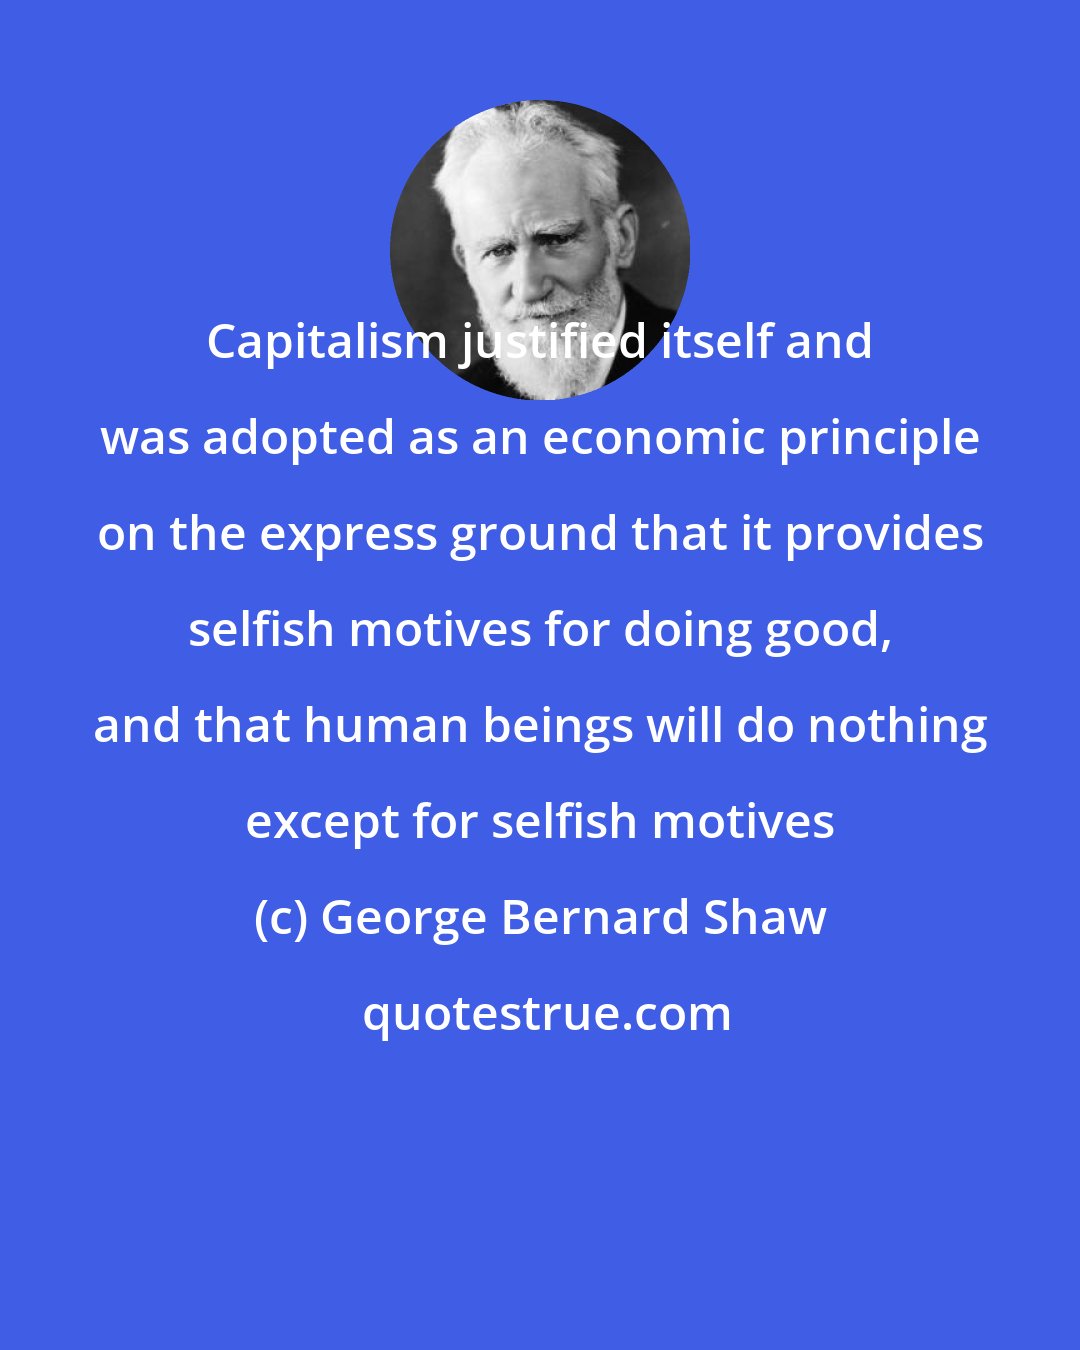 George Bernard Shaw: Capitalism justified itself and was adopted as an economic principle on the express ground that it provides selfish motives for doing good, and that human beings will do nothing except for selfish motives